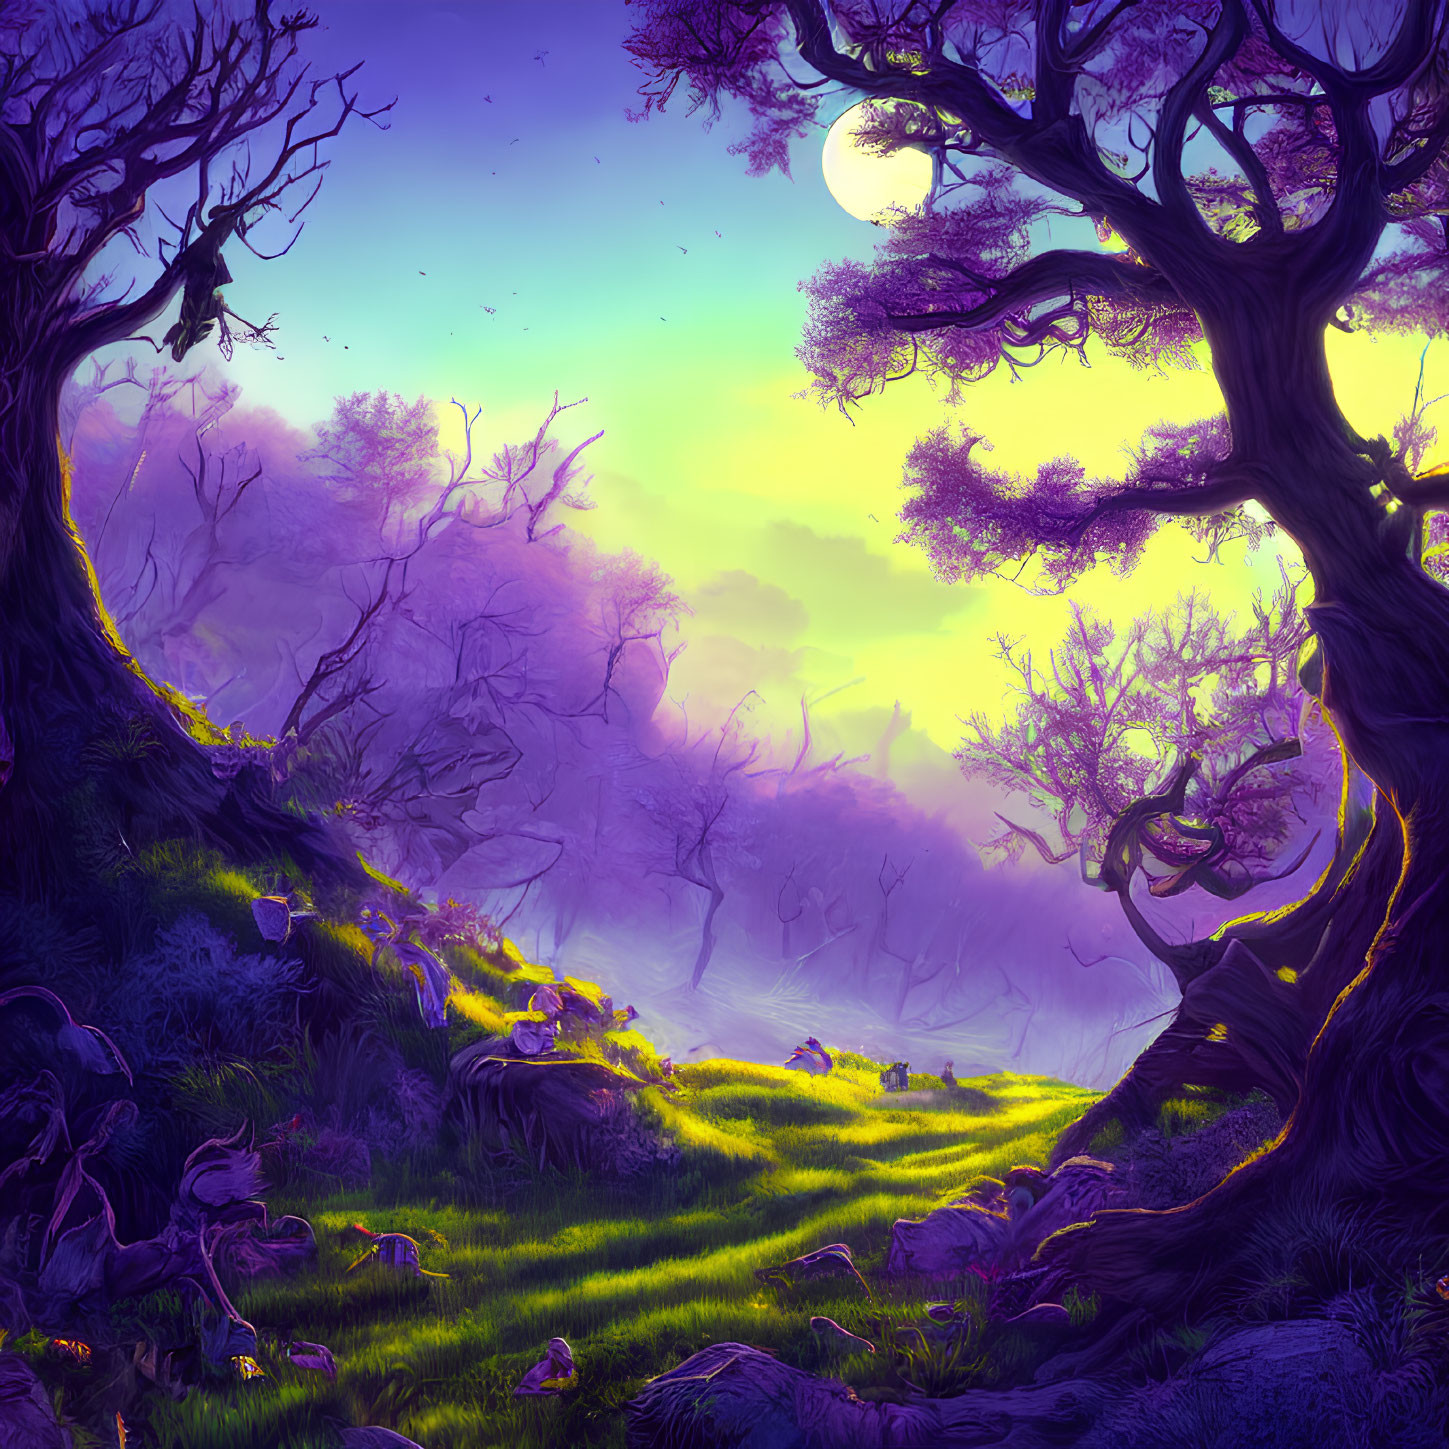 Twisted trees in mystical purple forest at twilight